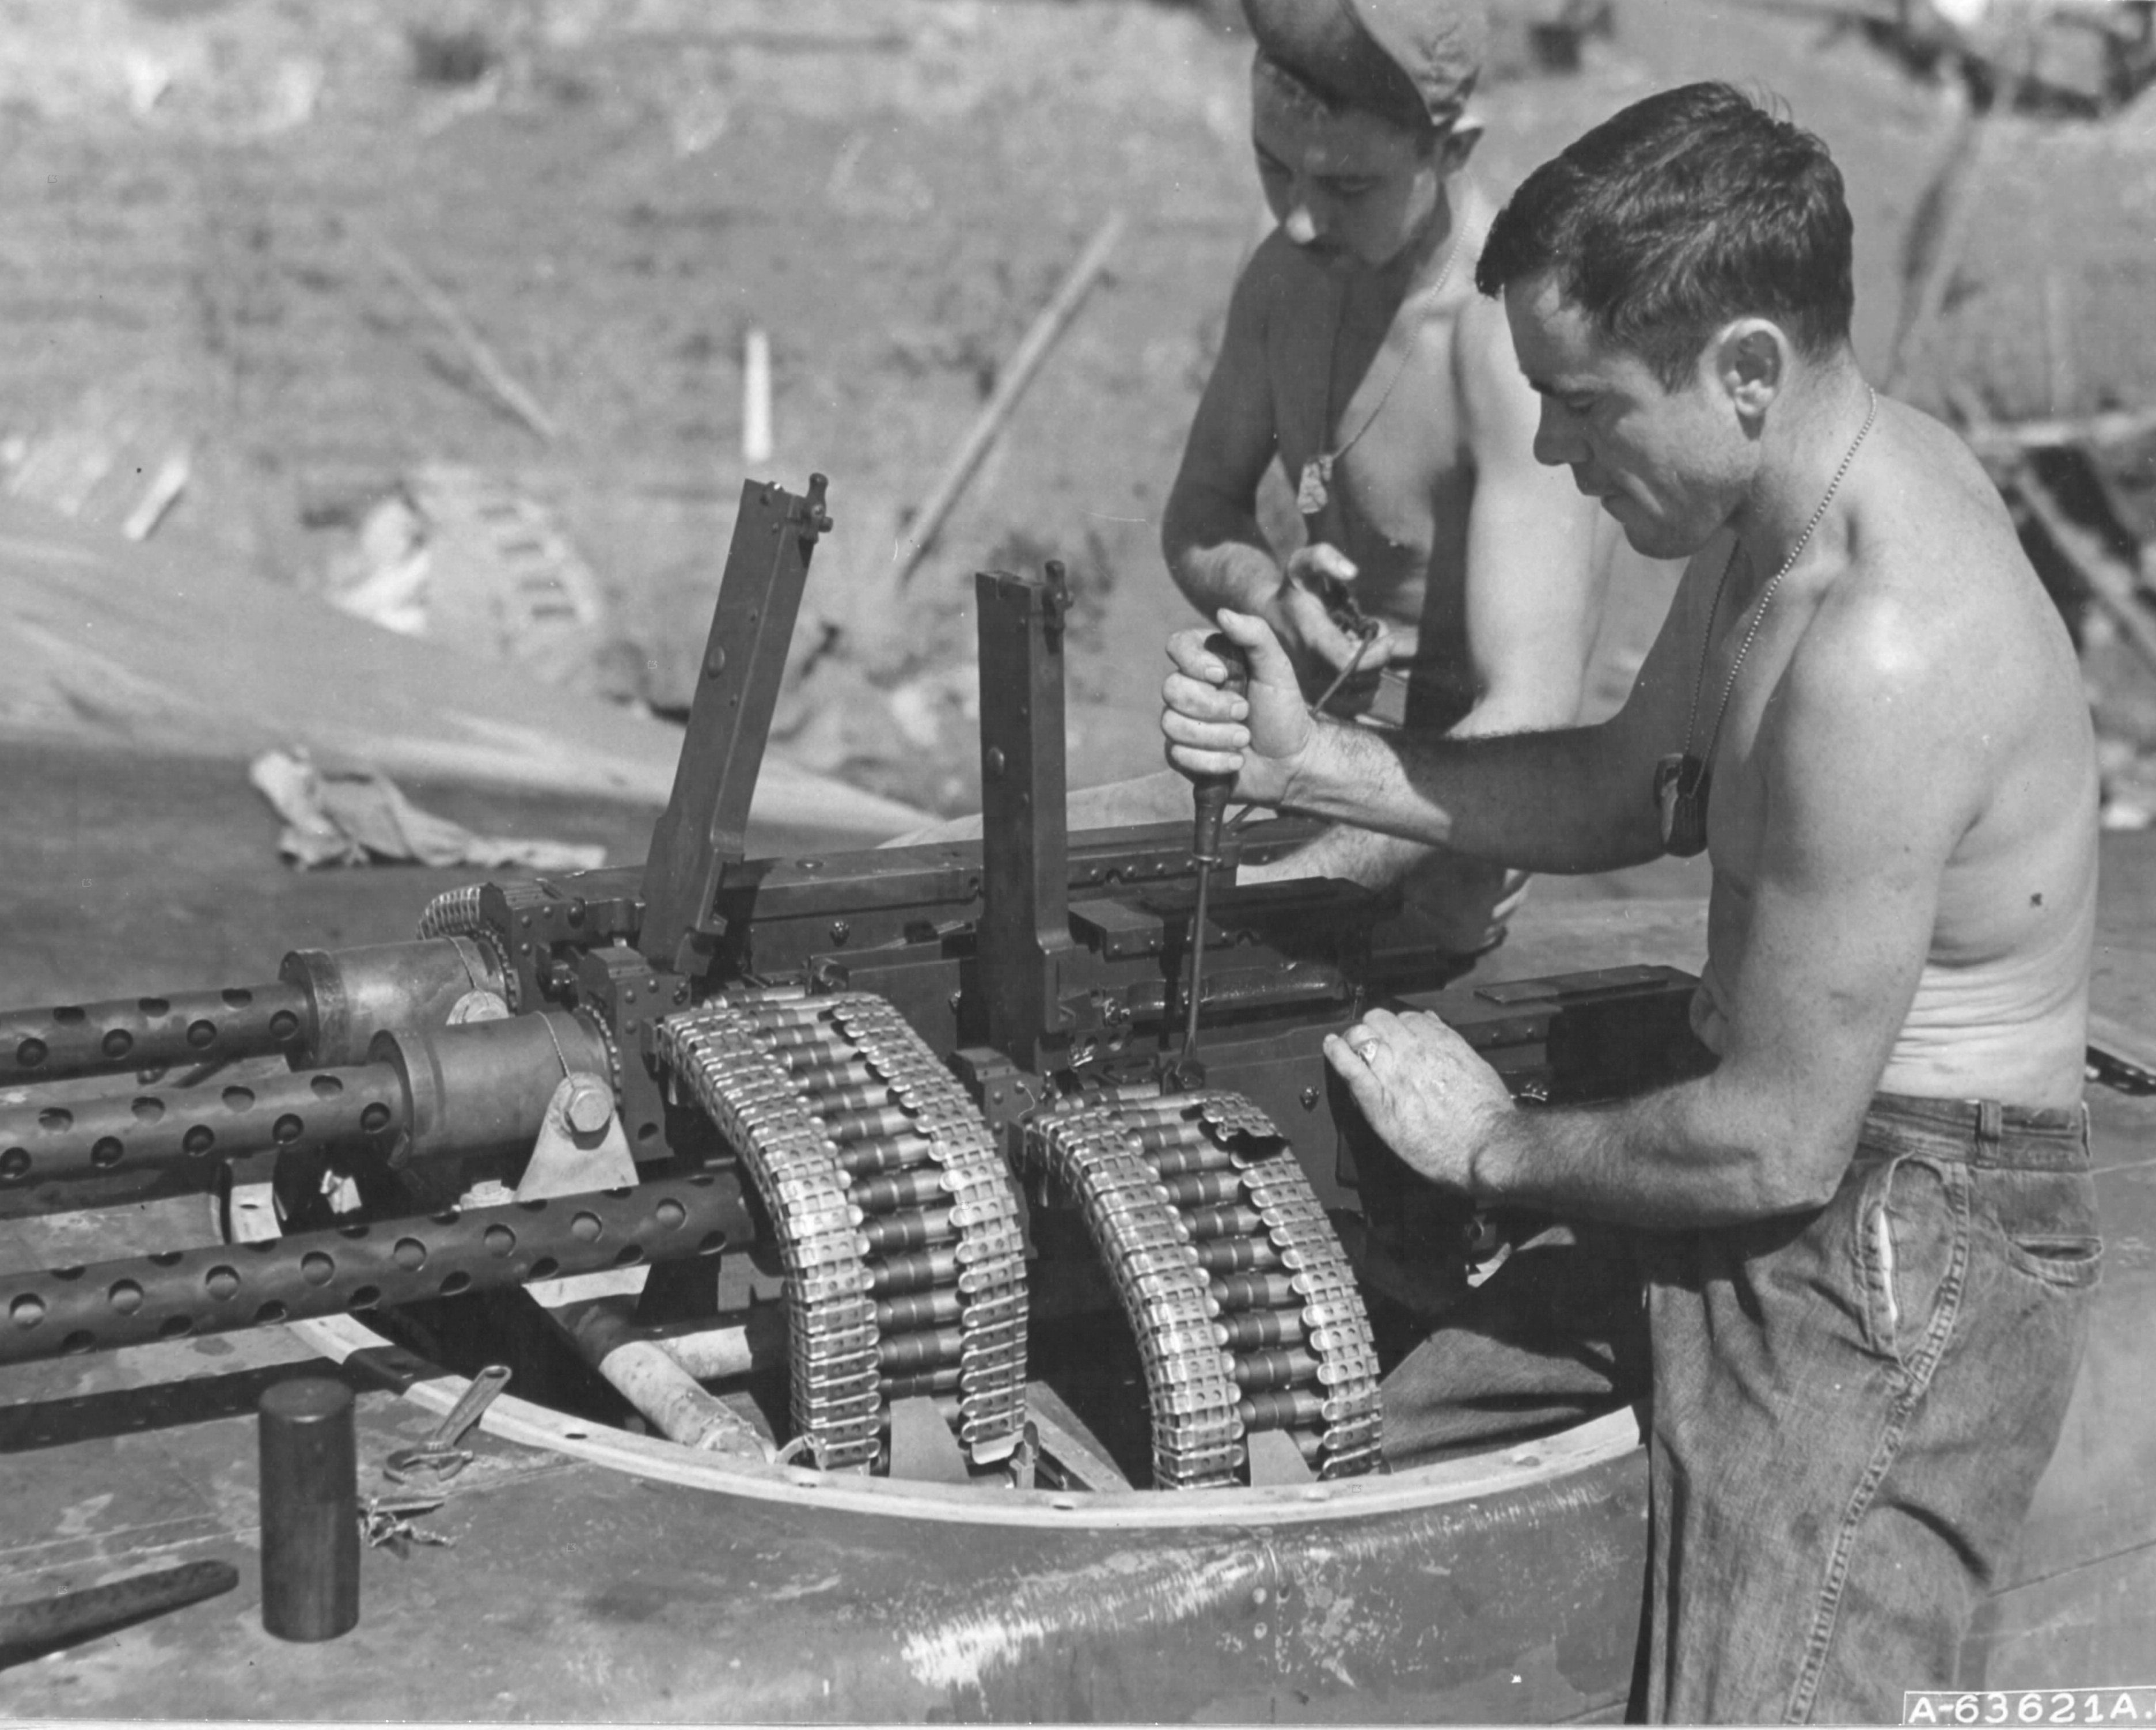 Armorers SSgt George Townsend and Sgt George Barker make ready the dorsal quad Browning .50 caliber machine guns of a P-61 Black Widow night fighter, Saipan, 19 Jul 1944.